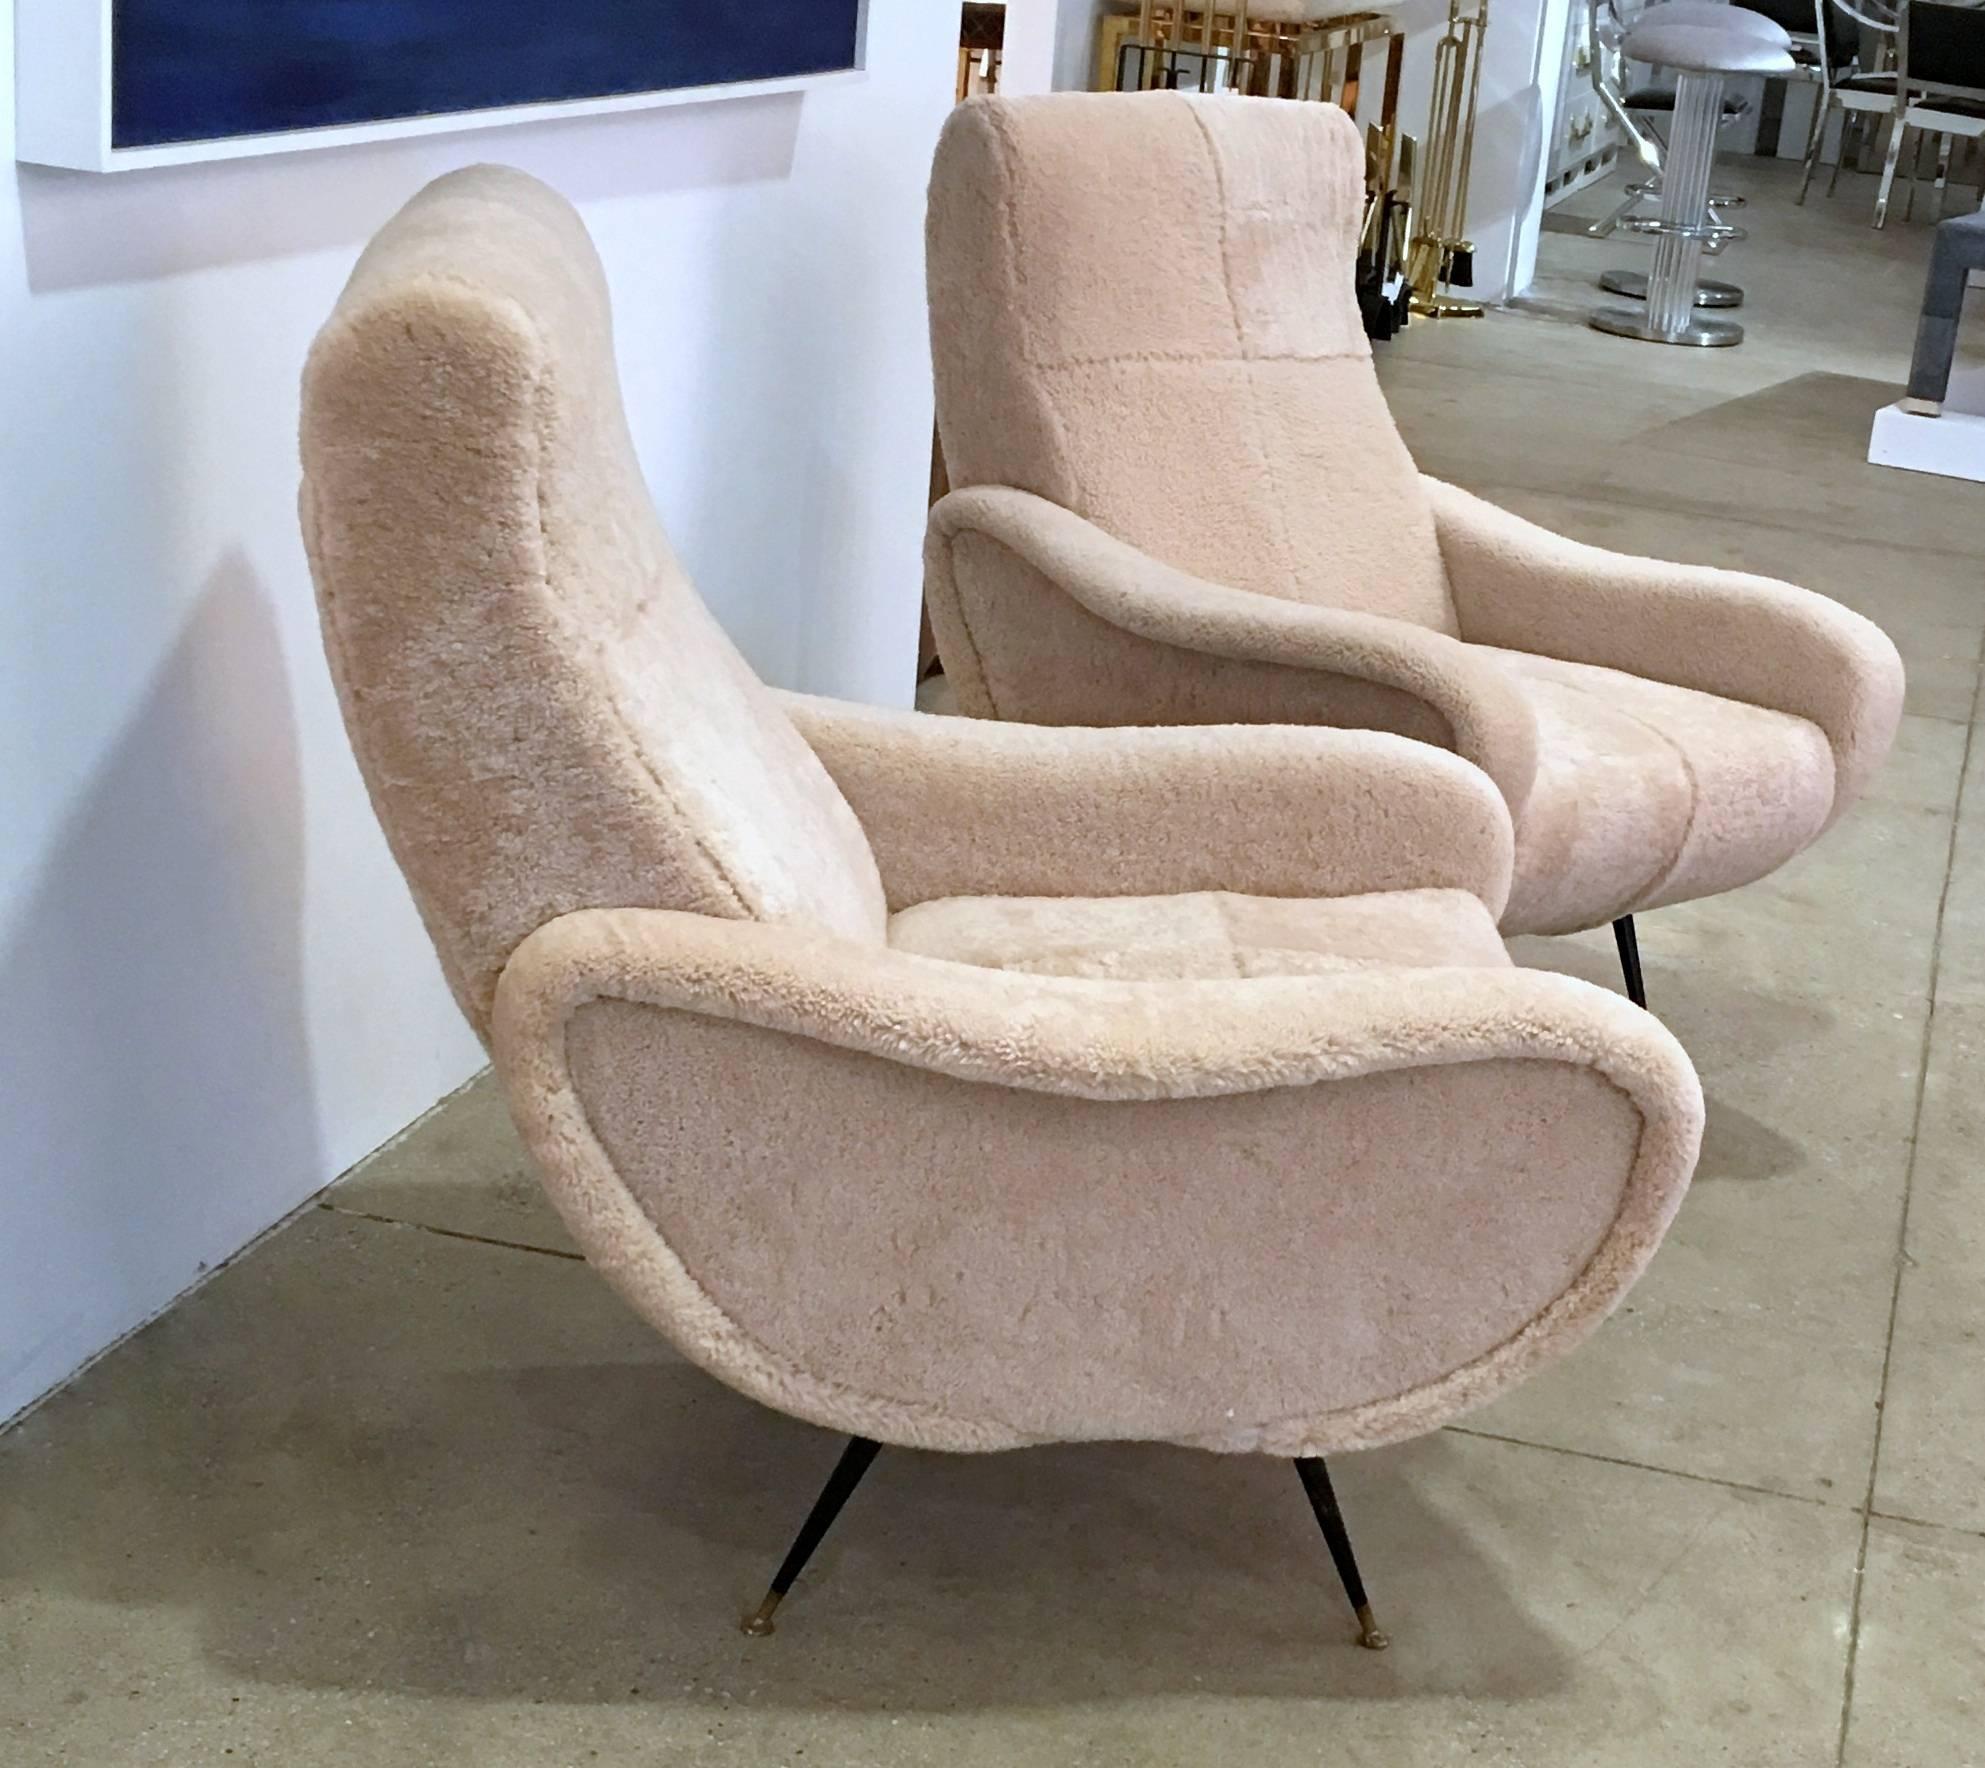 Pair of Mid-Century Italian chairs recently upholstered in shearling with black metal legs and brass feet.